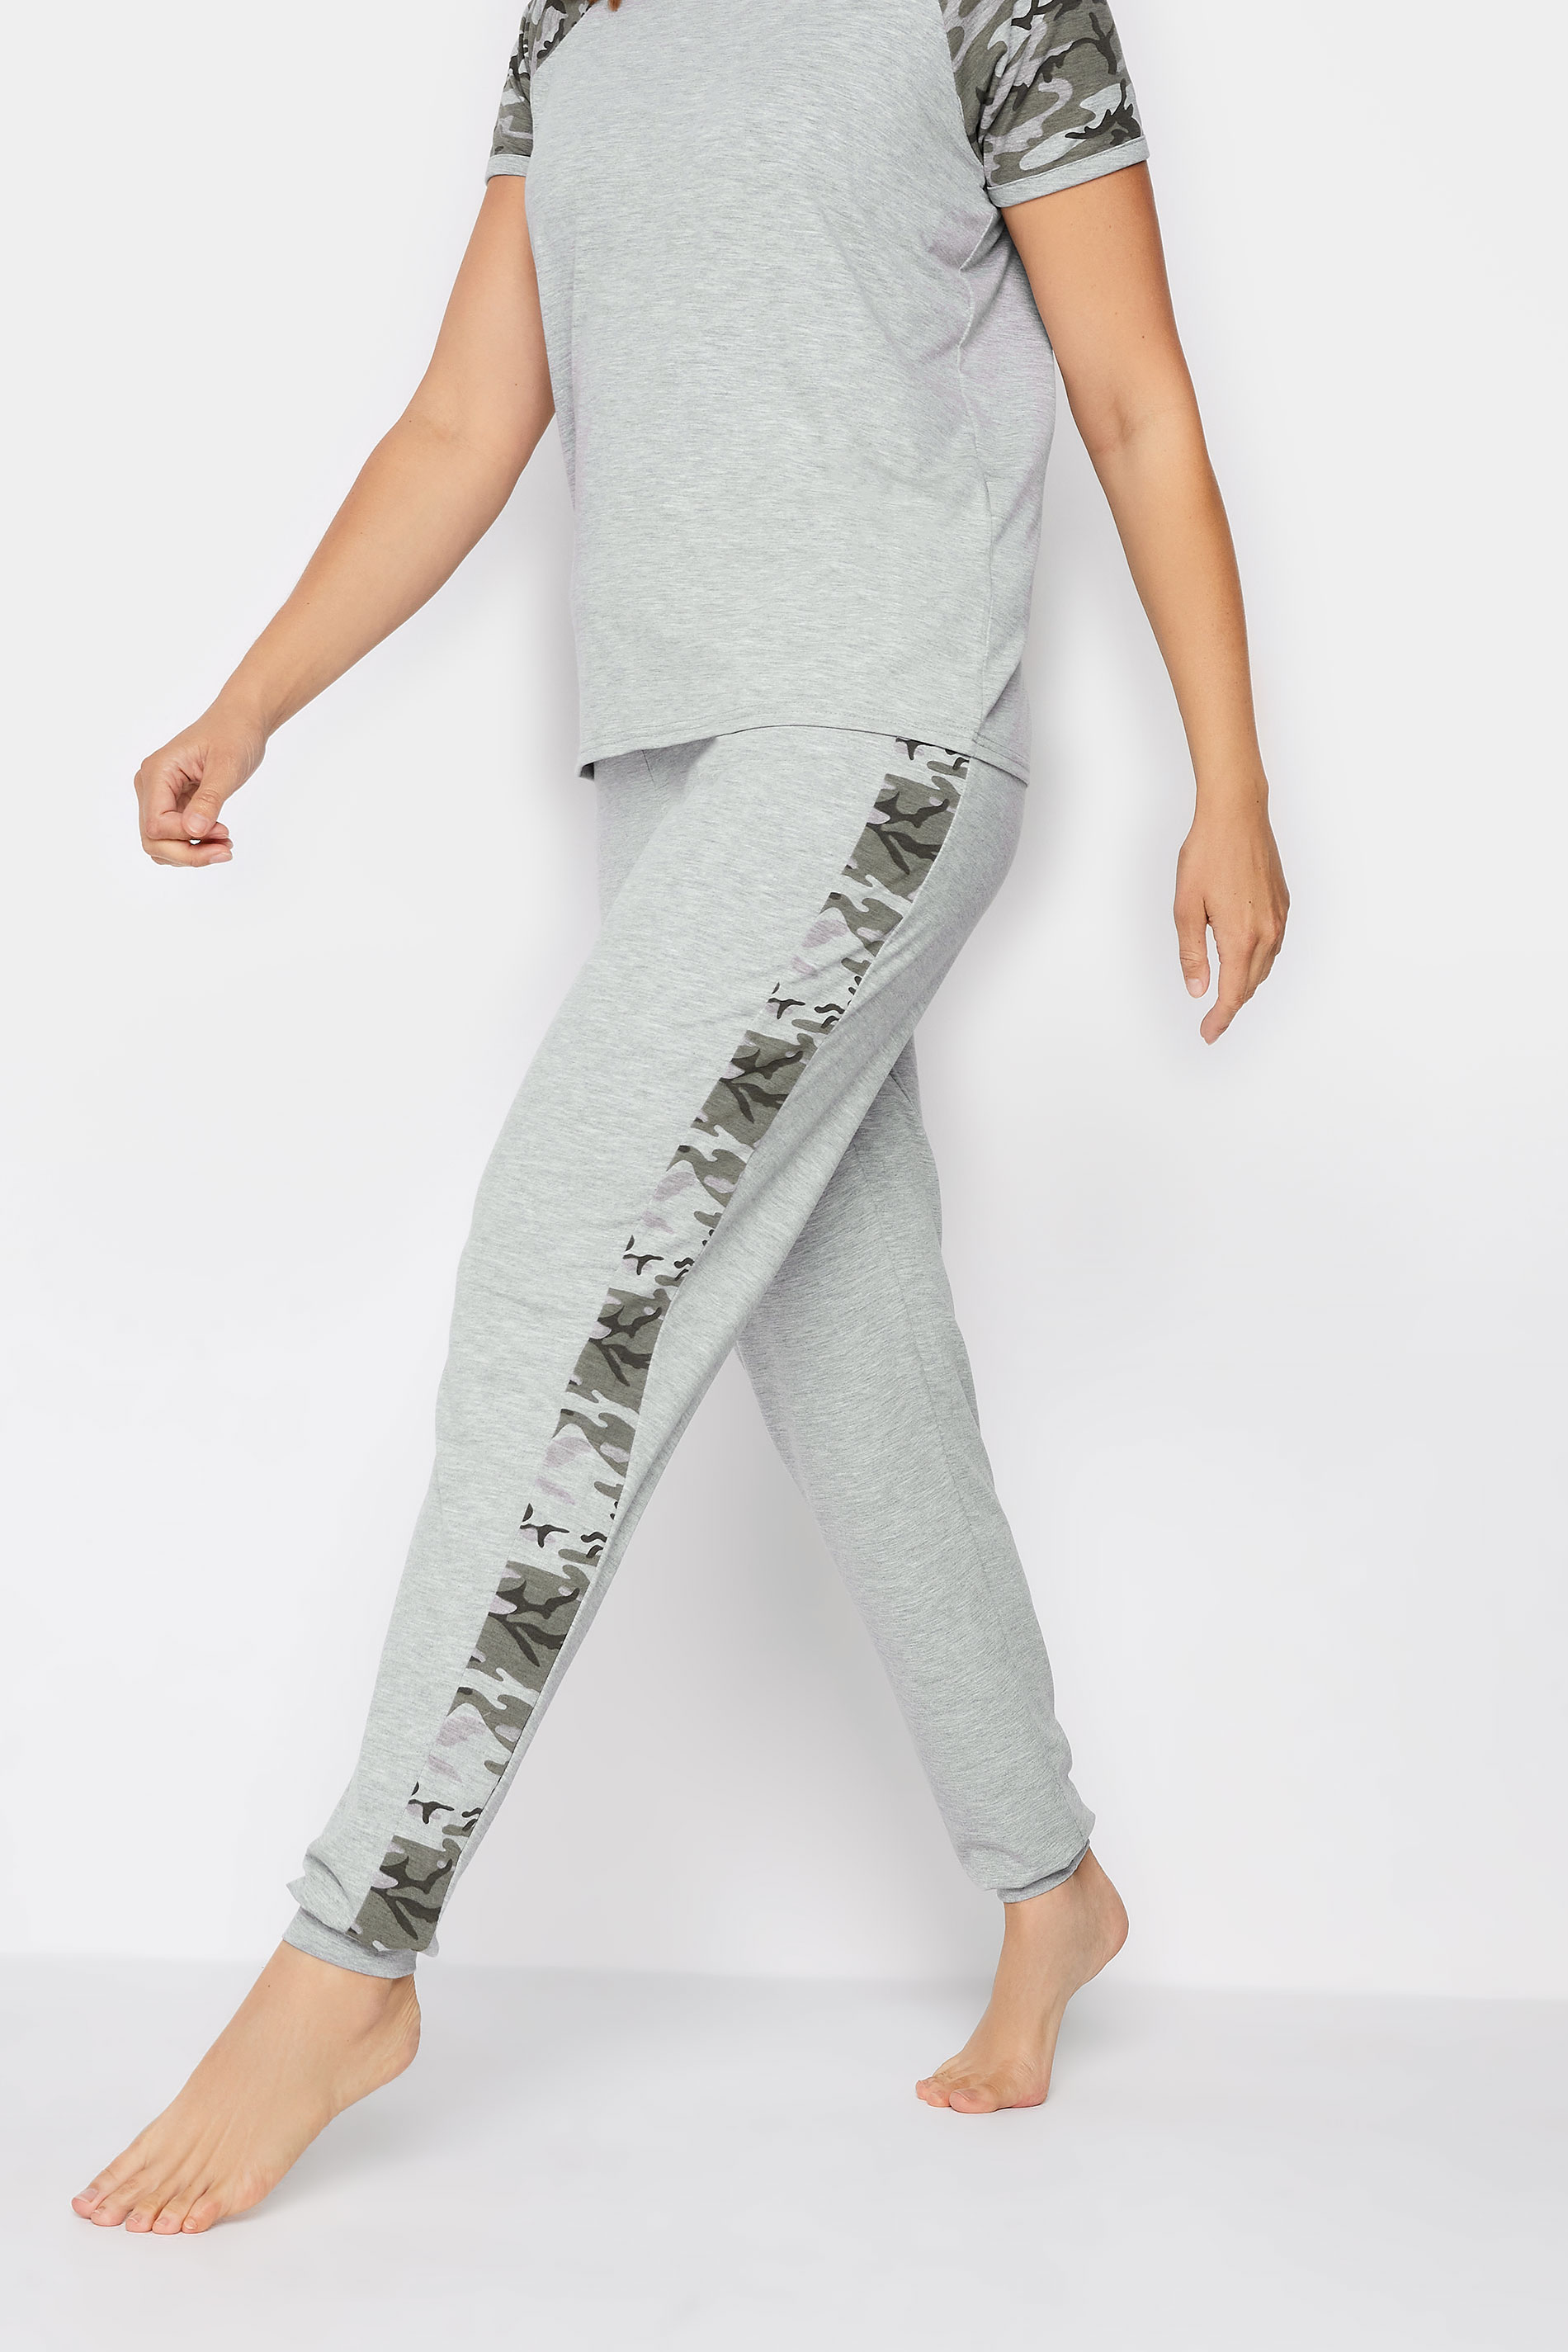 LTS Tall Women's Grey Camouflage Print Side Stripe Joggers | Long Tall Sally 2